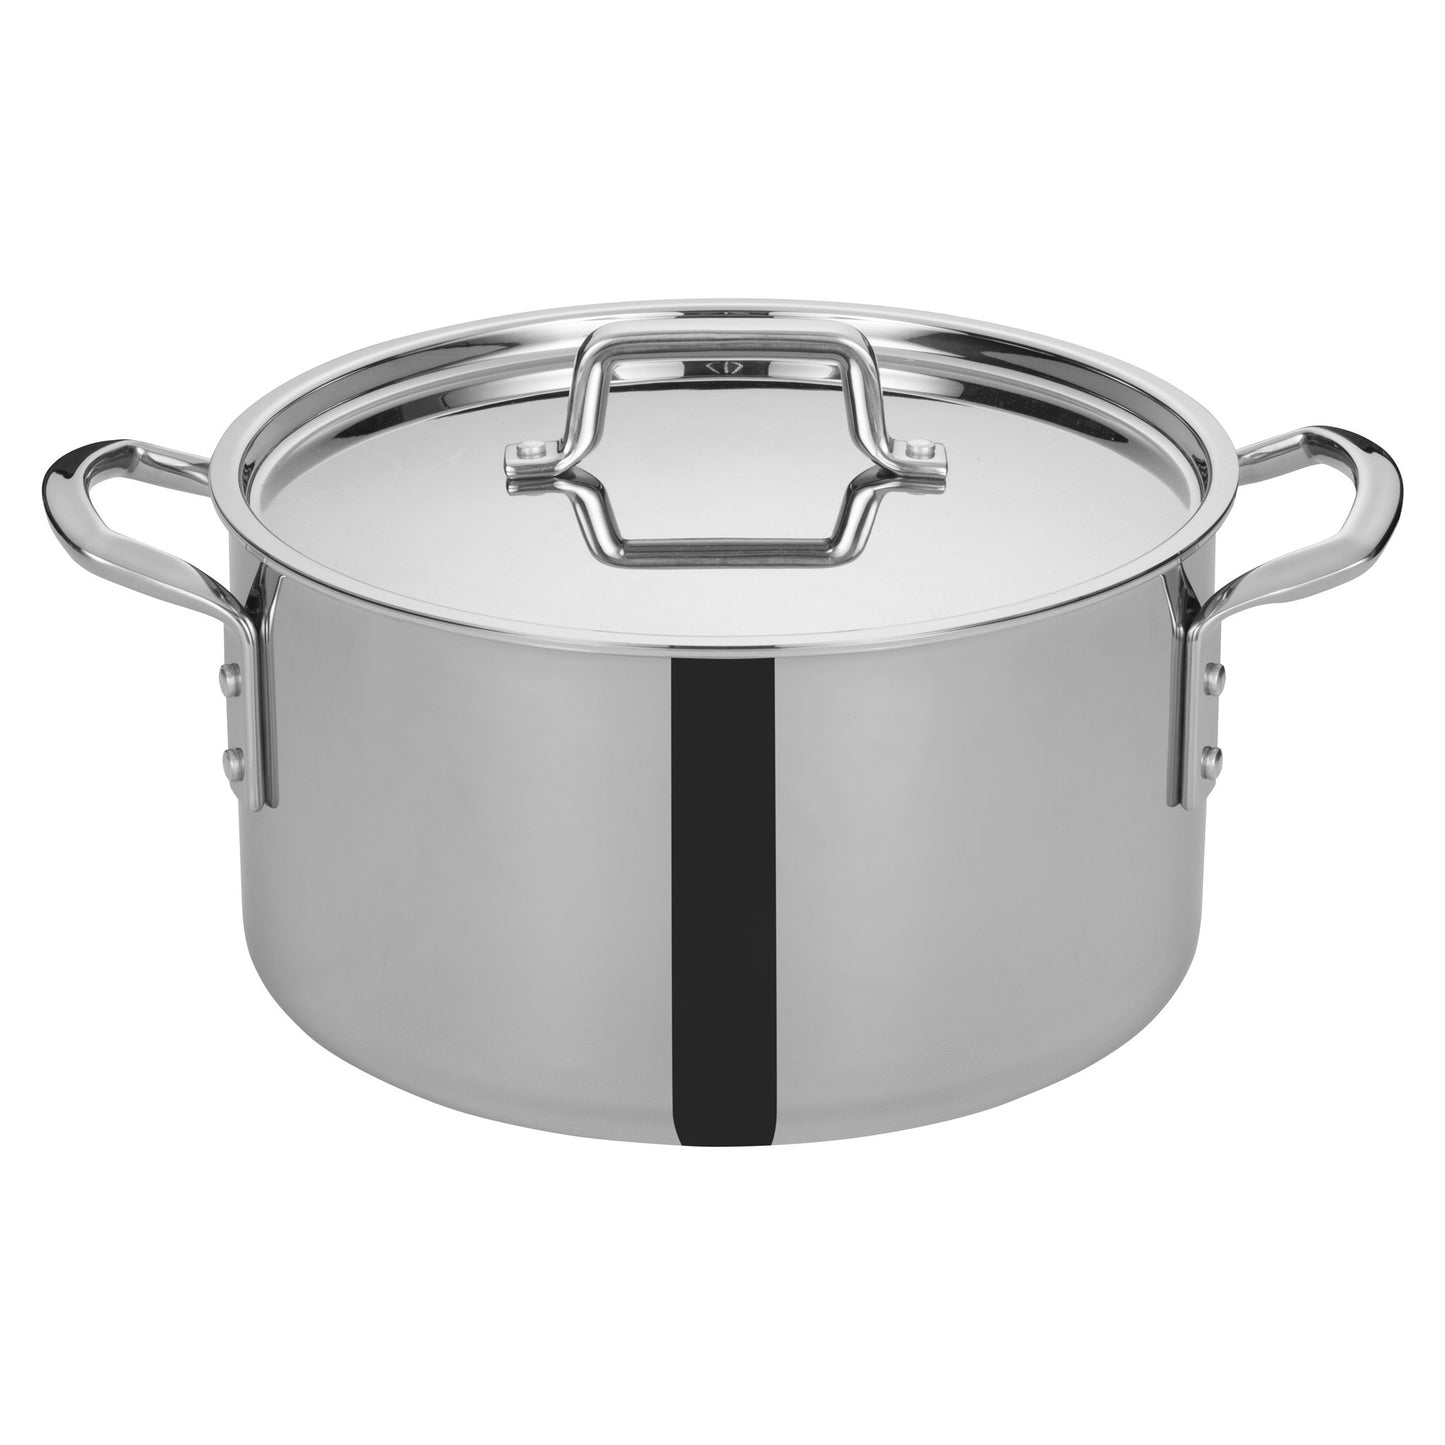 TGSP-12 - Tri-Gen Tri-Ply Stainless Steel Stock Pot with Cover - 12 Quart